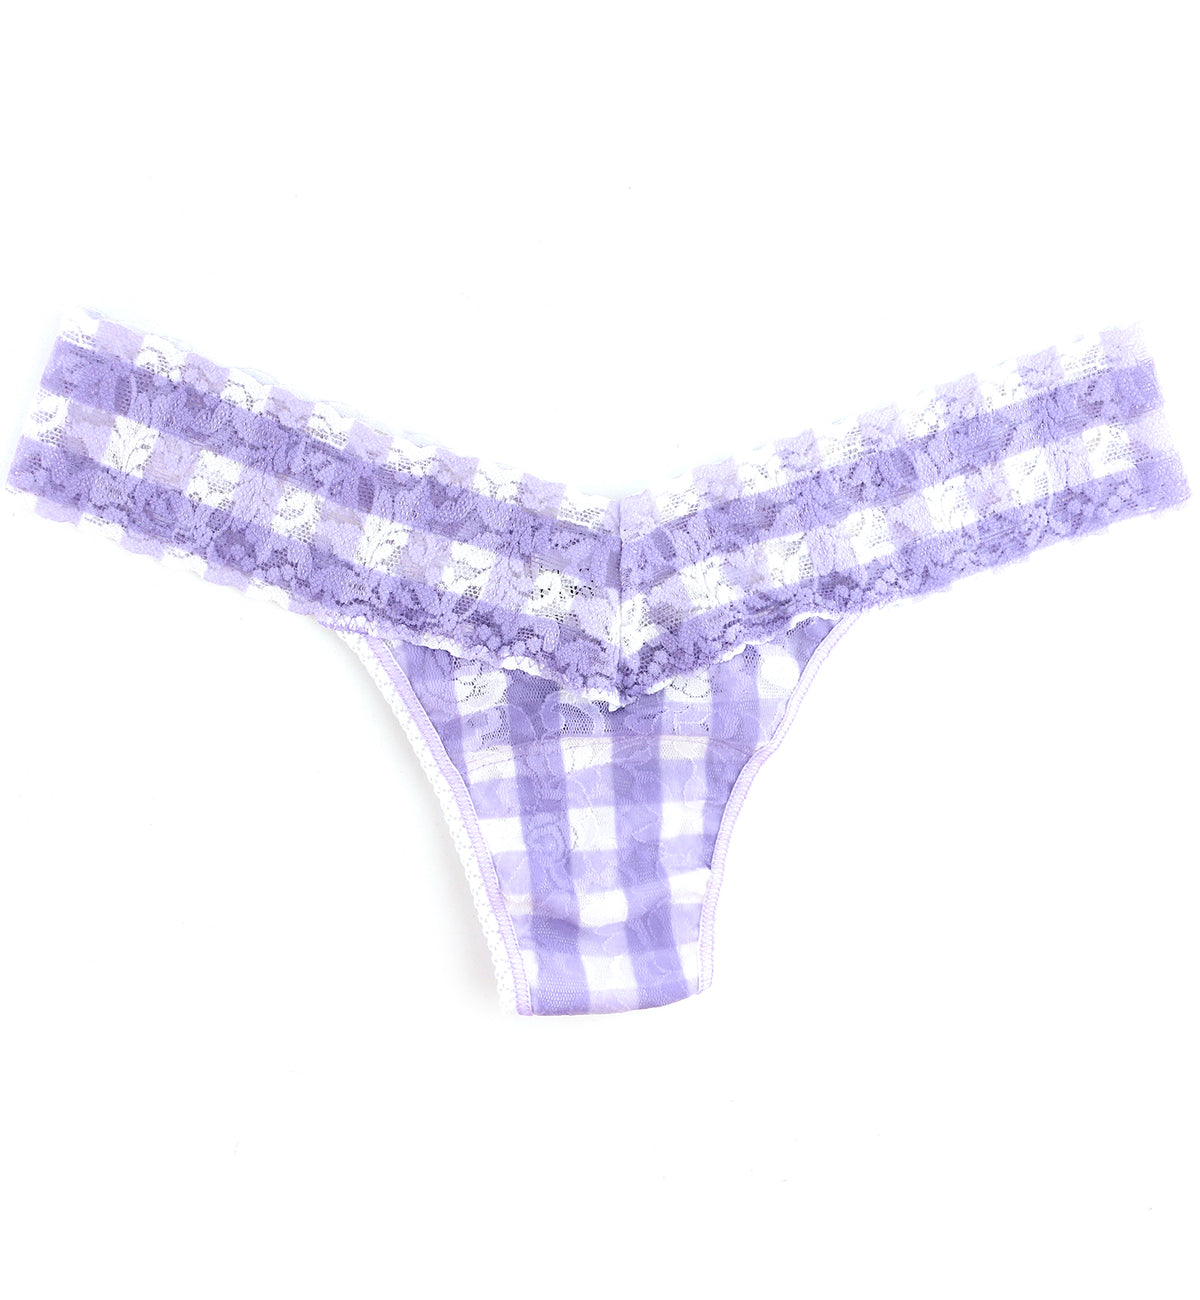 Hanky Panky Signature Lace Printed Low Rise Thong (PR4911P),Varsity Gingham - Varsity Gingham,One Size